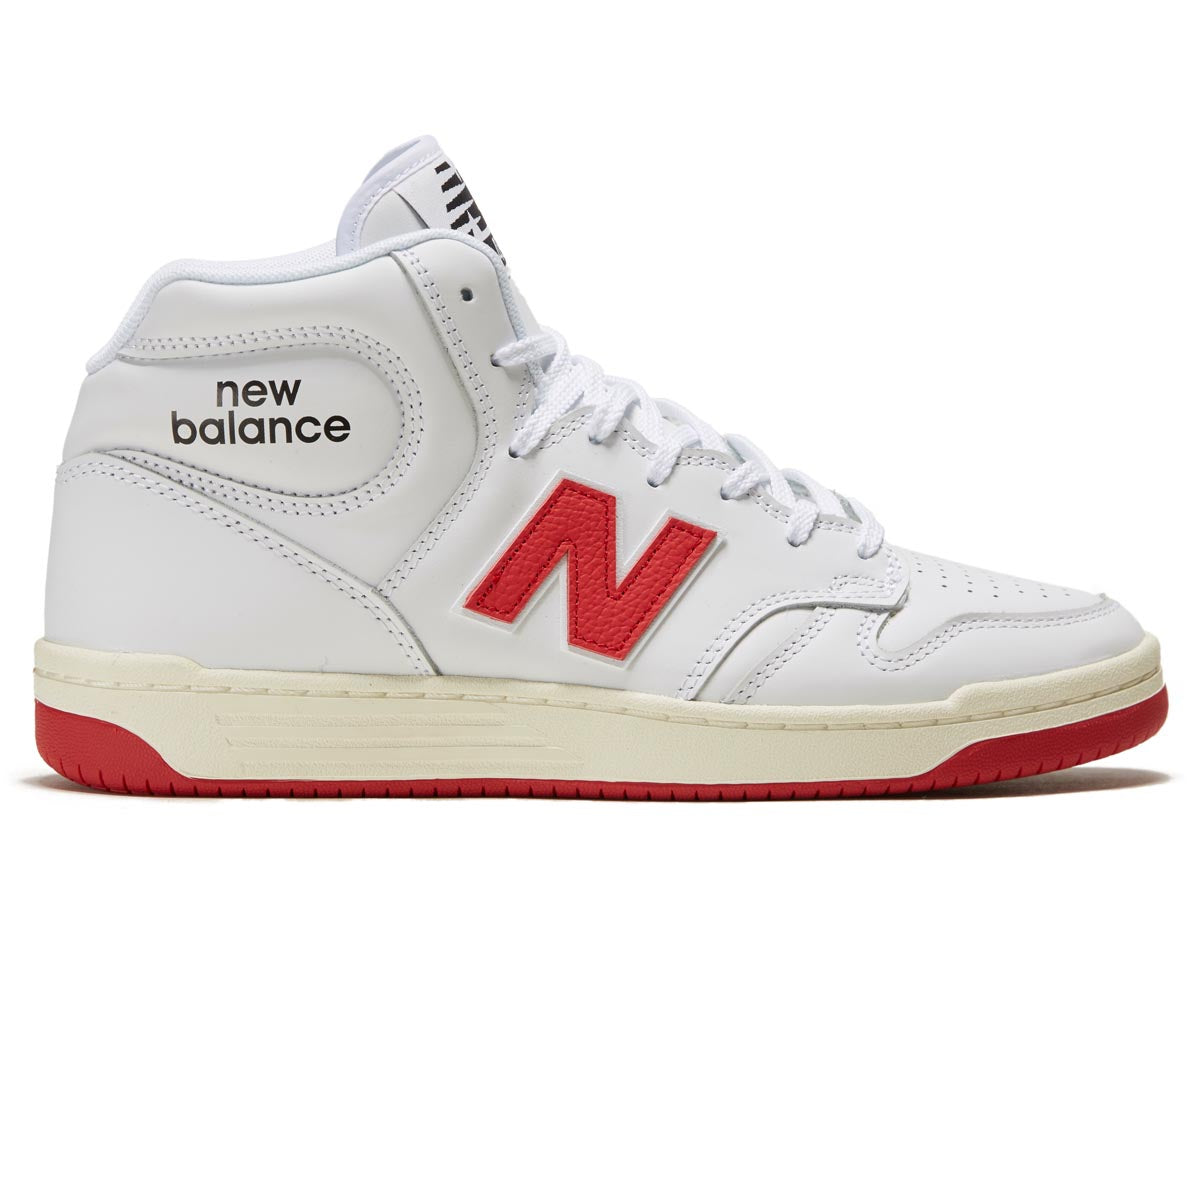 New Balance 480 High Shoes - White/Red image 1